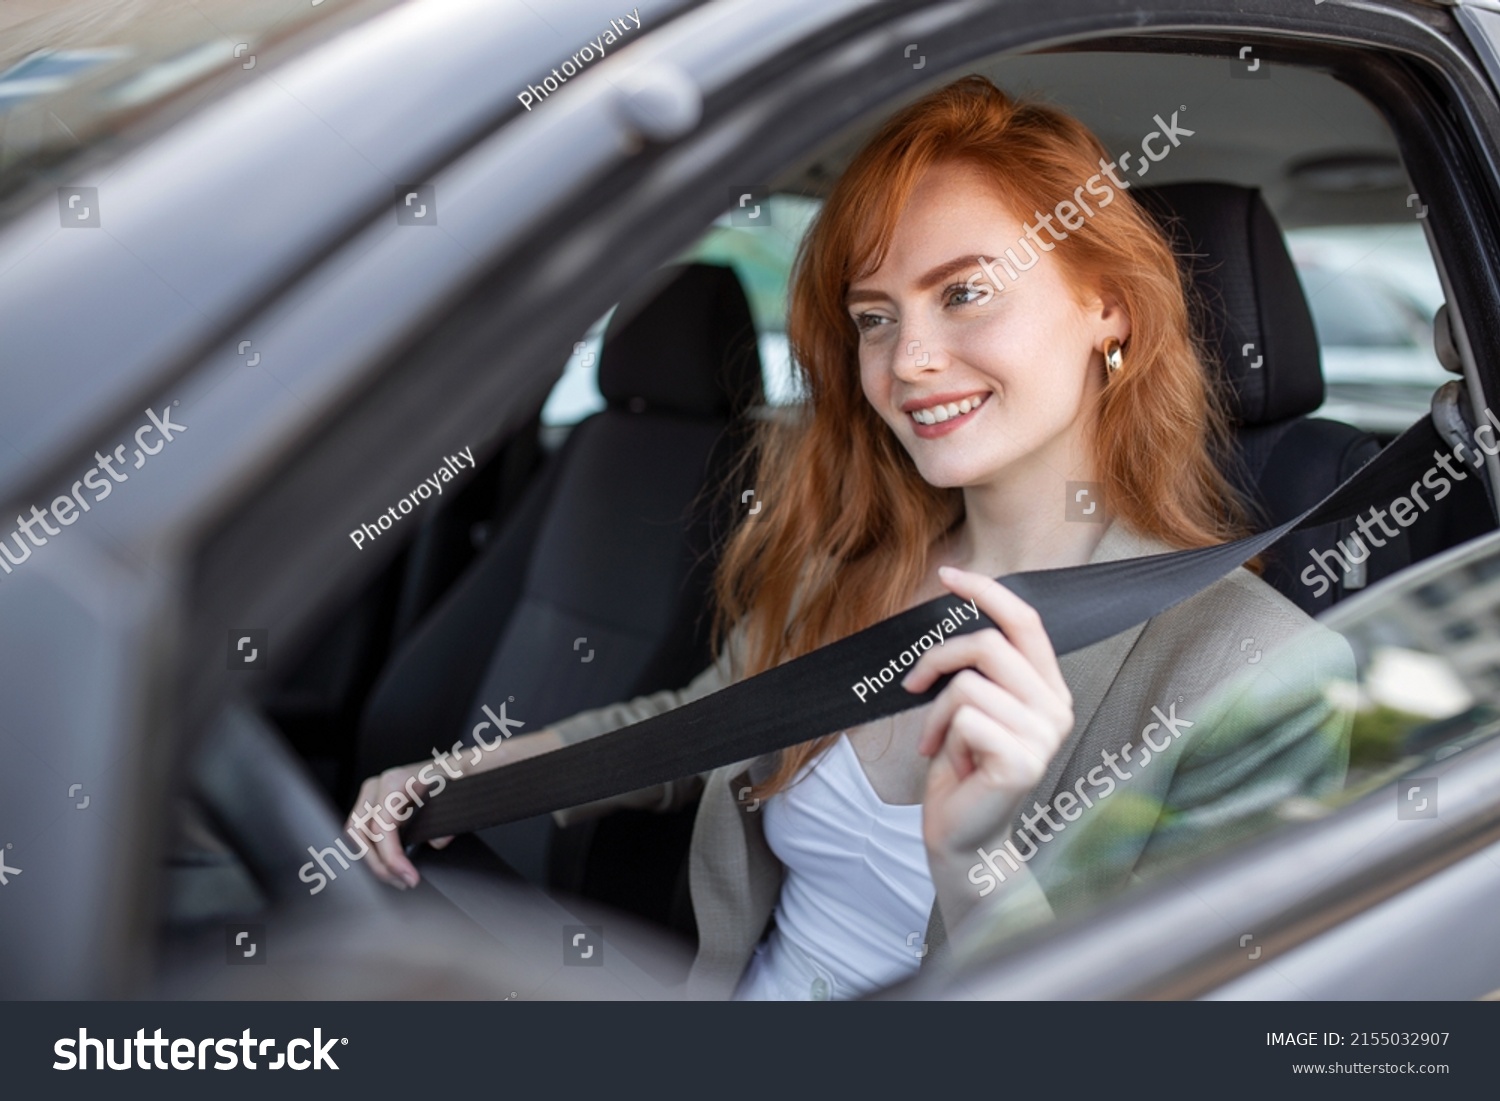 Young woman sitting on car seat and fastening seat belt, safety concept. Woman fastens a seat belt in the car. Caucasian woman driver fastening car seat belt while sitting behind the wheel car. #2155032907